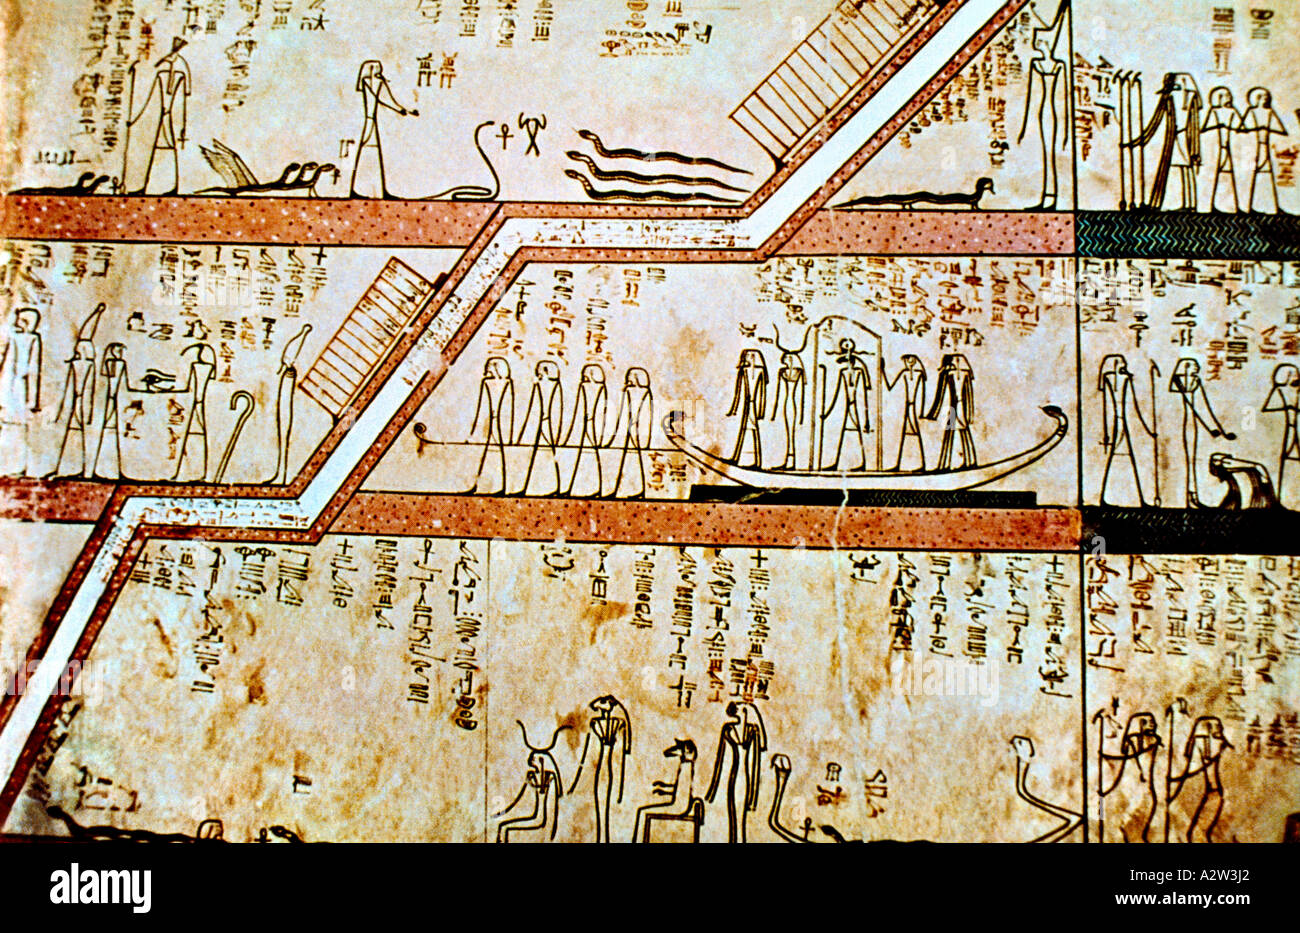 Egypt Paintings In The Tomb Of Thutmosis III Thebes Stock Photo